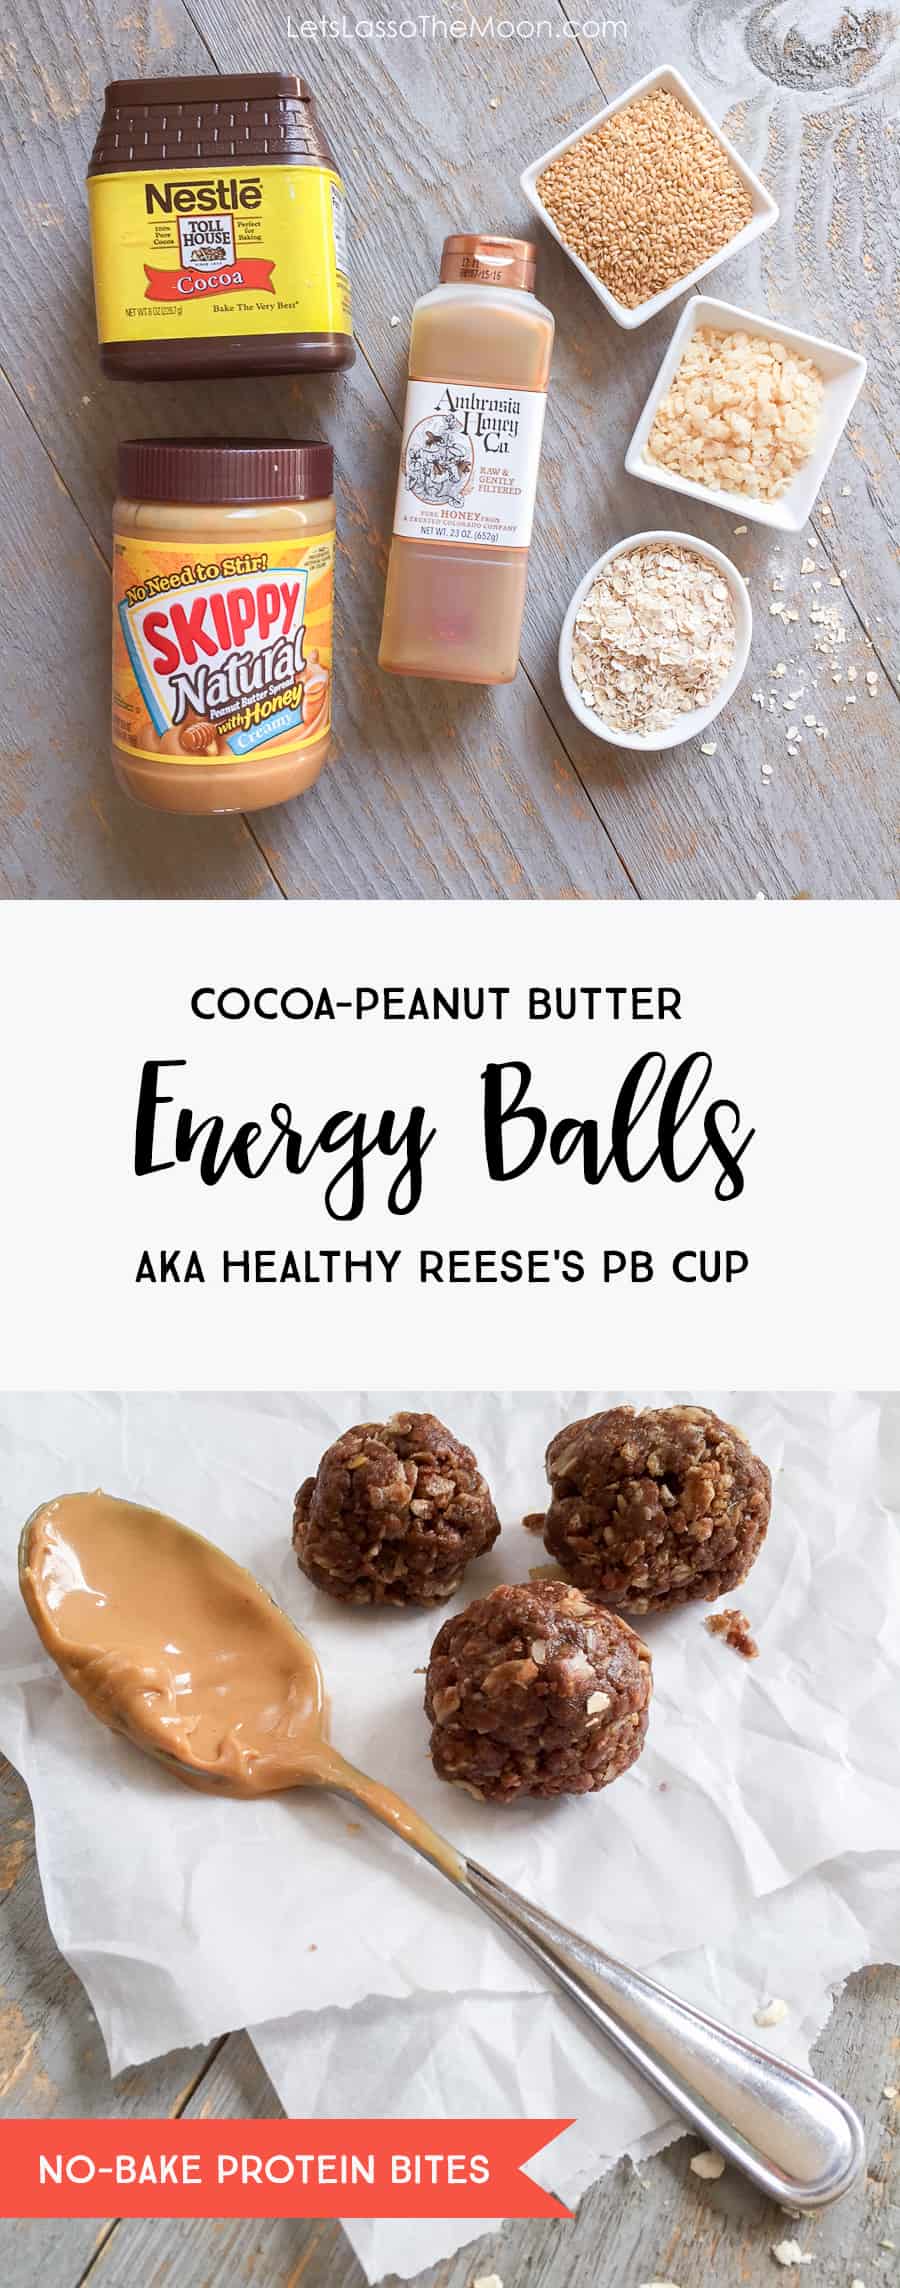 These no-bake snack bites are the perfect punch of protein. This chocolate peanut butter energy ball recipe tastes like a healthy Resse's peanut butter cup. The kids love this healthy recipe! #recipe #snack #proteinballs #energyballs *So trying these protein balls. Perfect for an on-the-go travel or afterschool snack for kids.